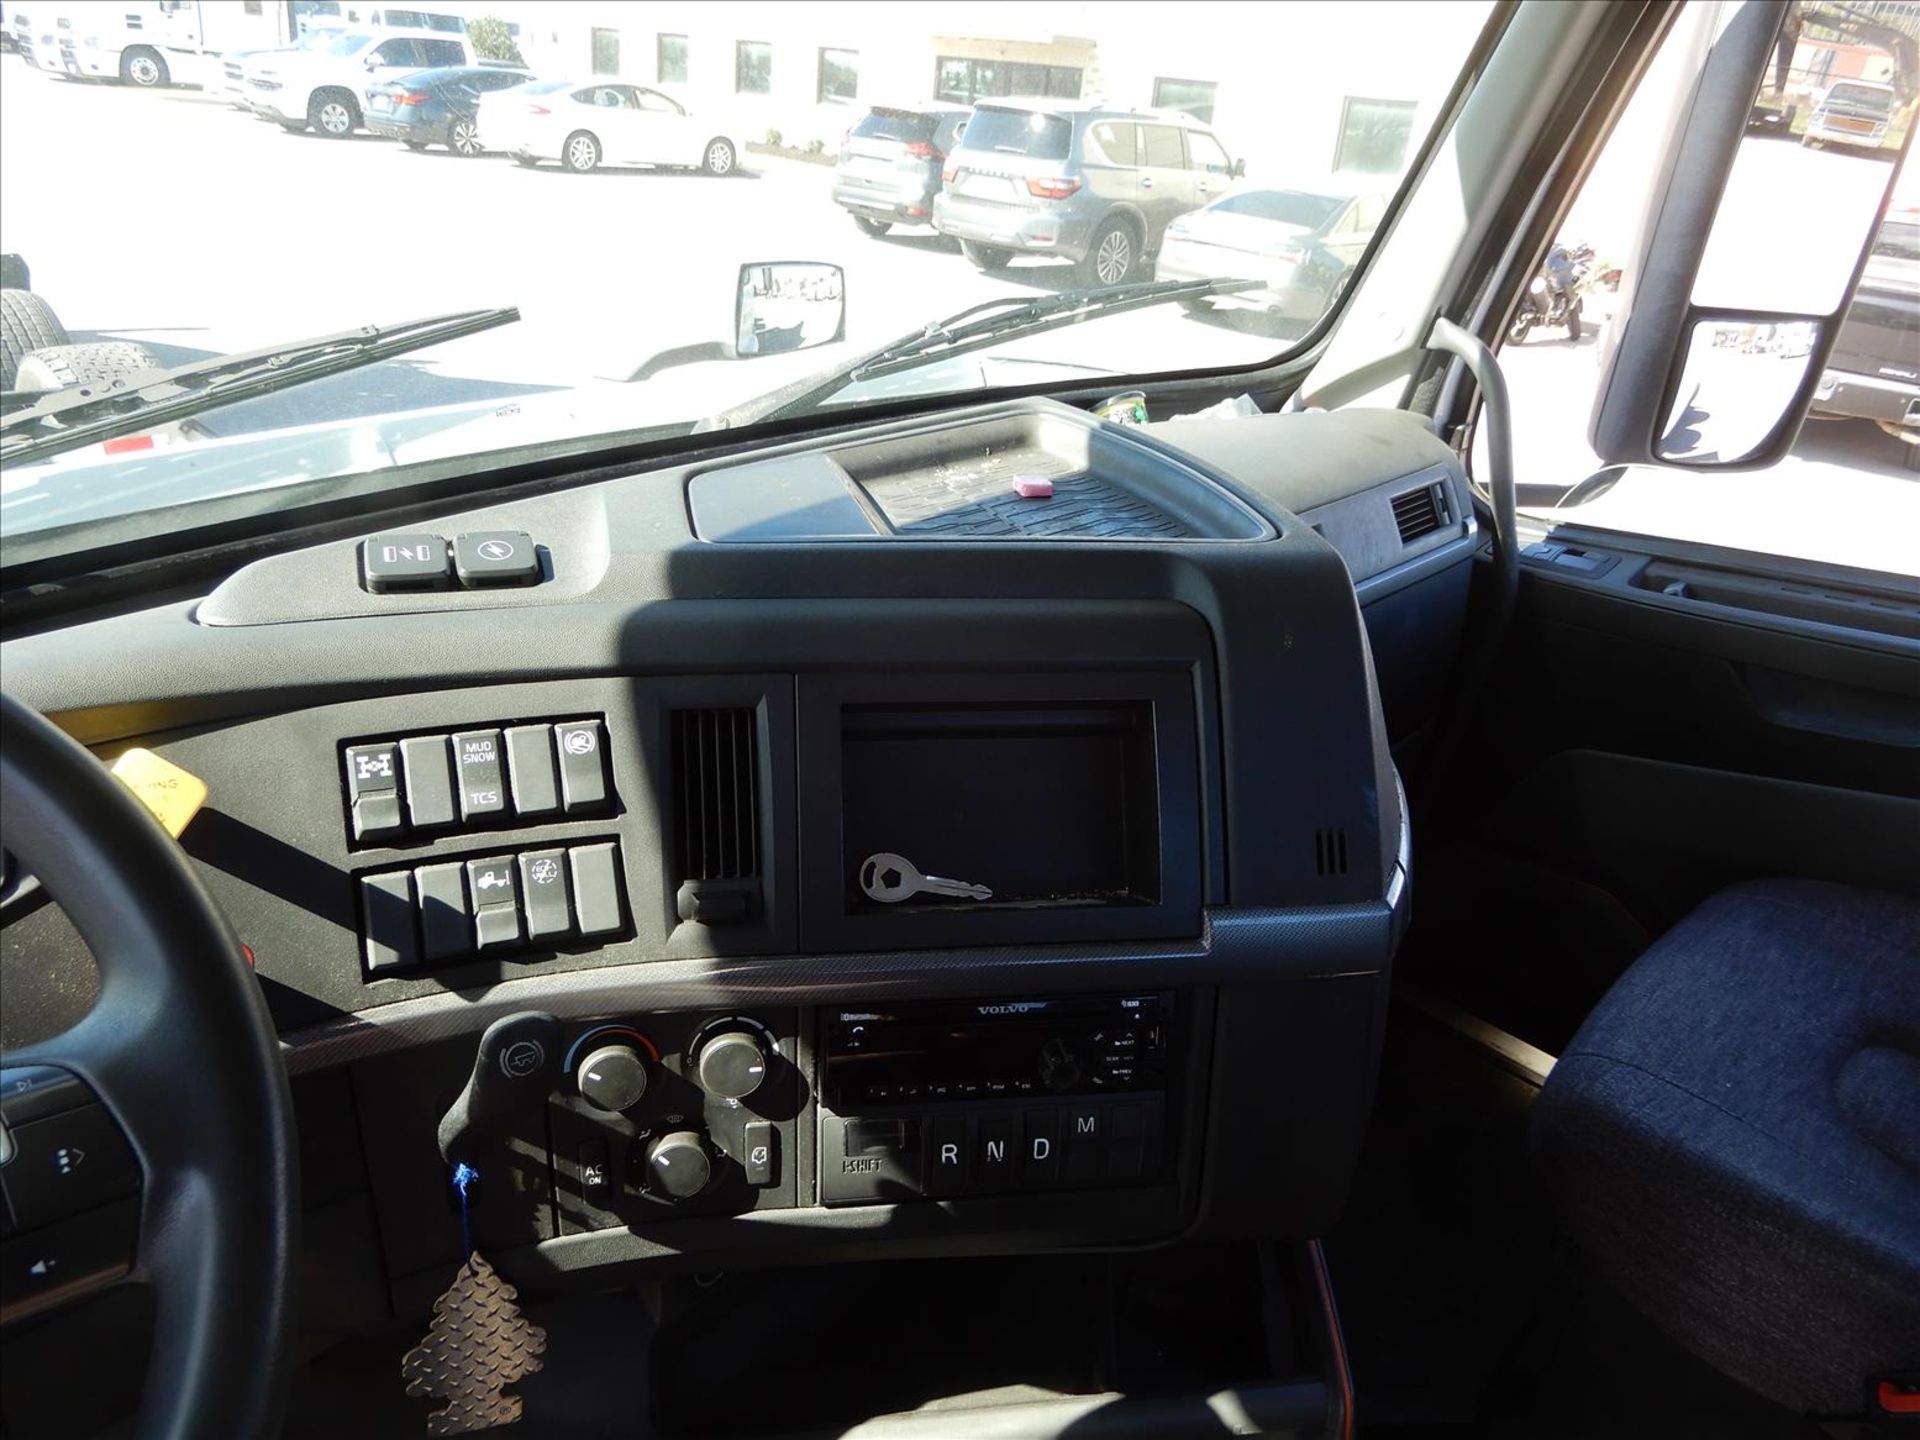 2020 Volvo VNR 300 Daycab Truck Tractor - Located in Murfreesboro, TN - Image 39 of 62